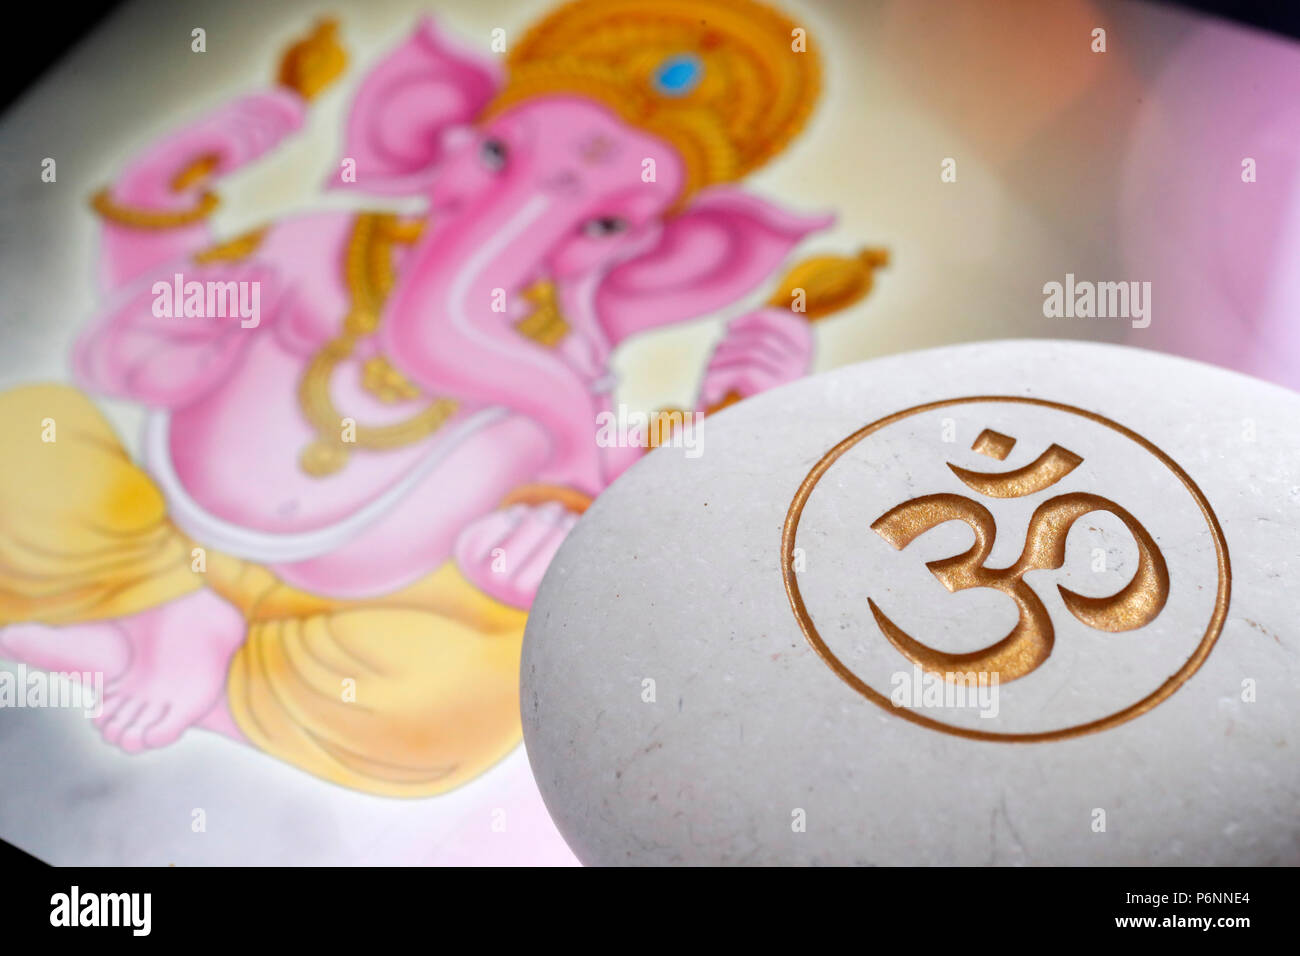 The Om or Aum symbol of Hinduism and Buddhism on a white stone.  Image of Ganesha also known as Ganapati on a tablet. Stock Photo